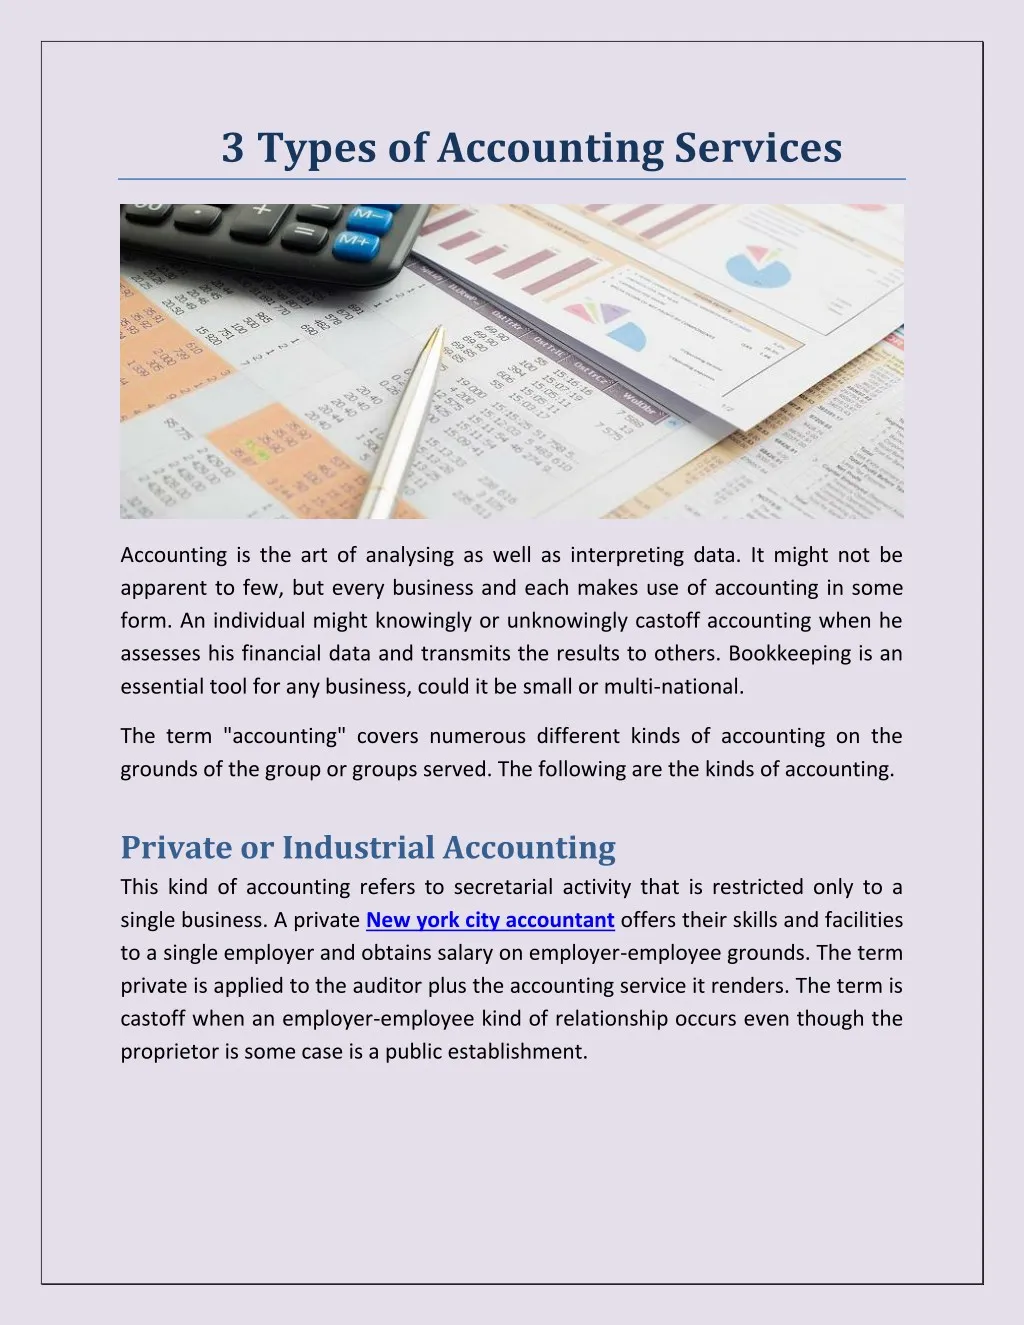 3 types of accounting services